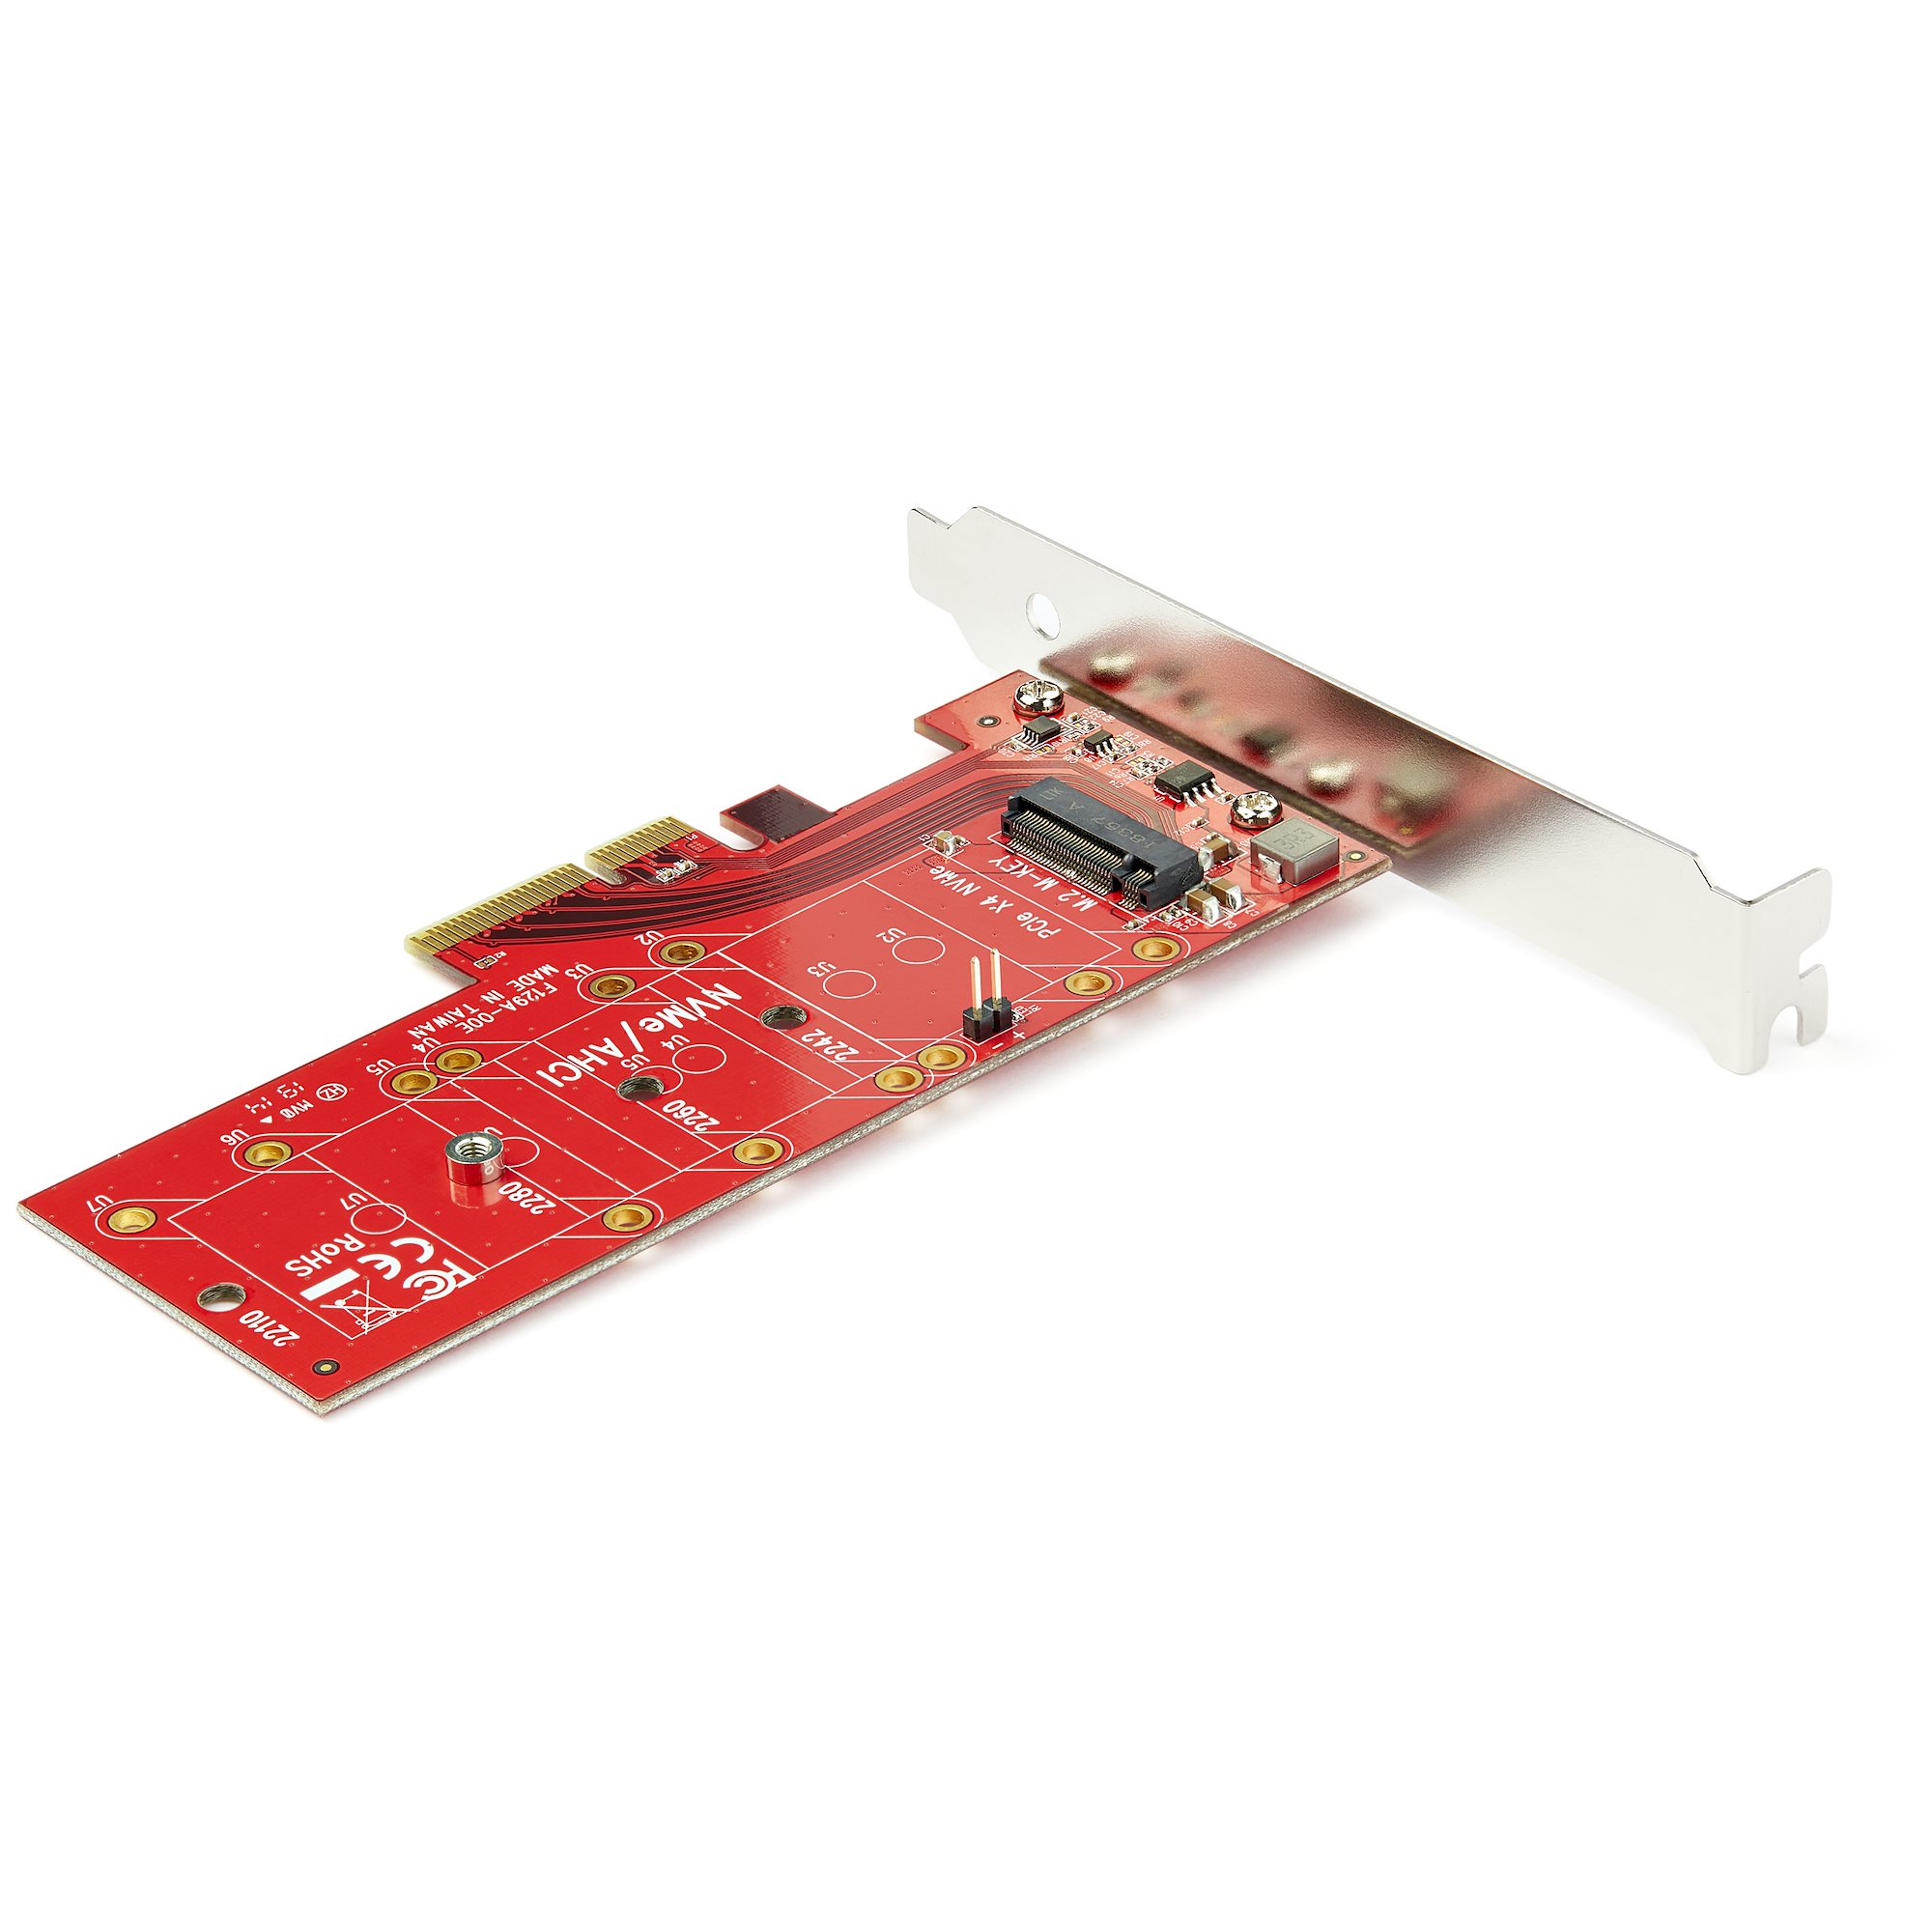 x4 PCI Express to M.2 PCIe SSD Adapter - Drive Adapters and Drive  Converters, Hard Drive Accessories